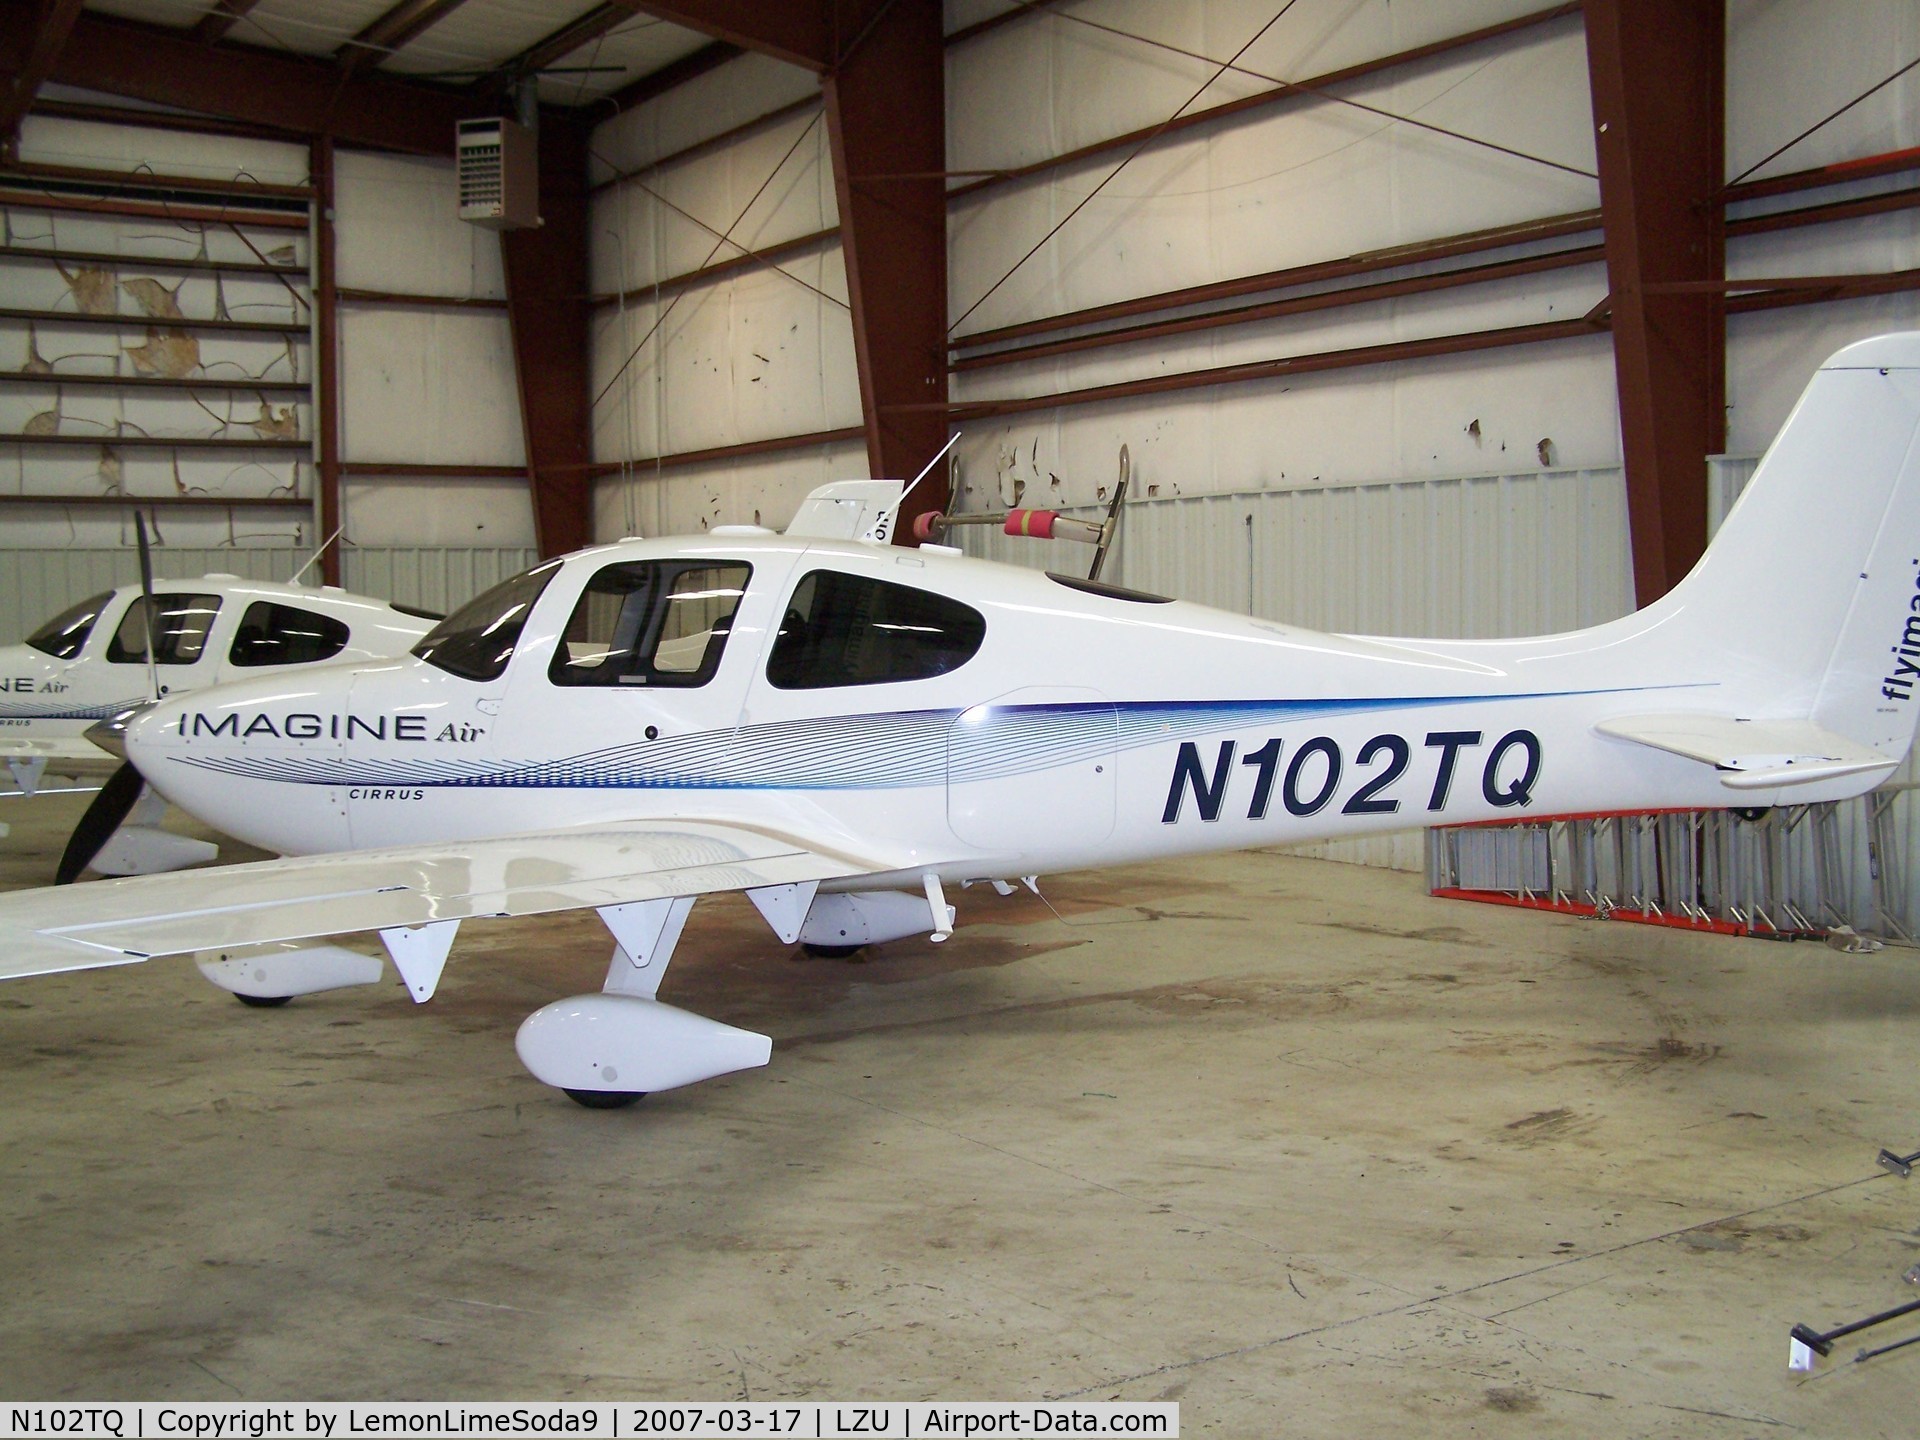 N102TQ, 2006 Cirrus SR22 C/N 2018, Just another day.